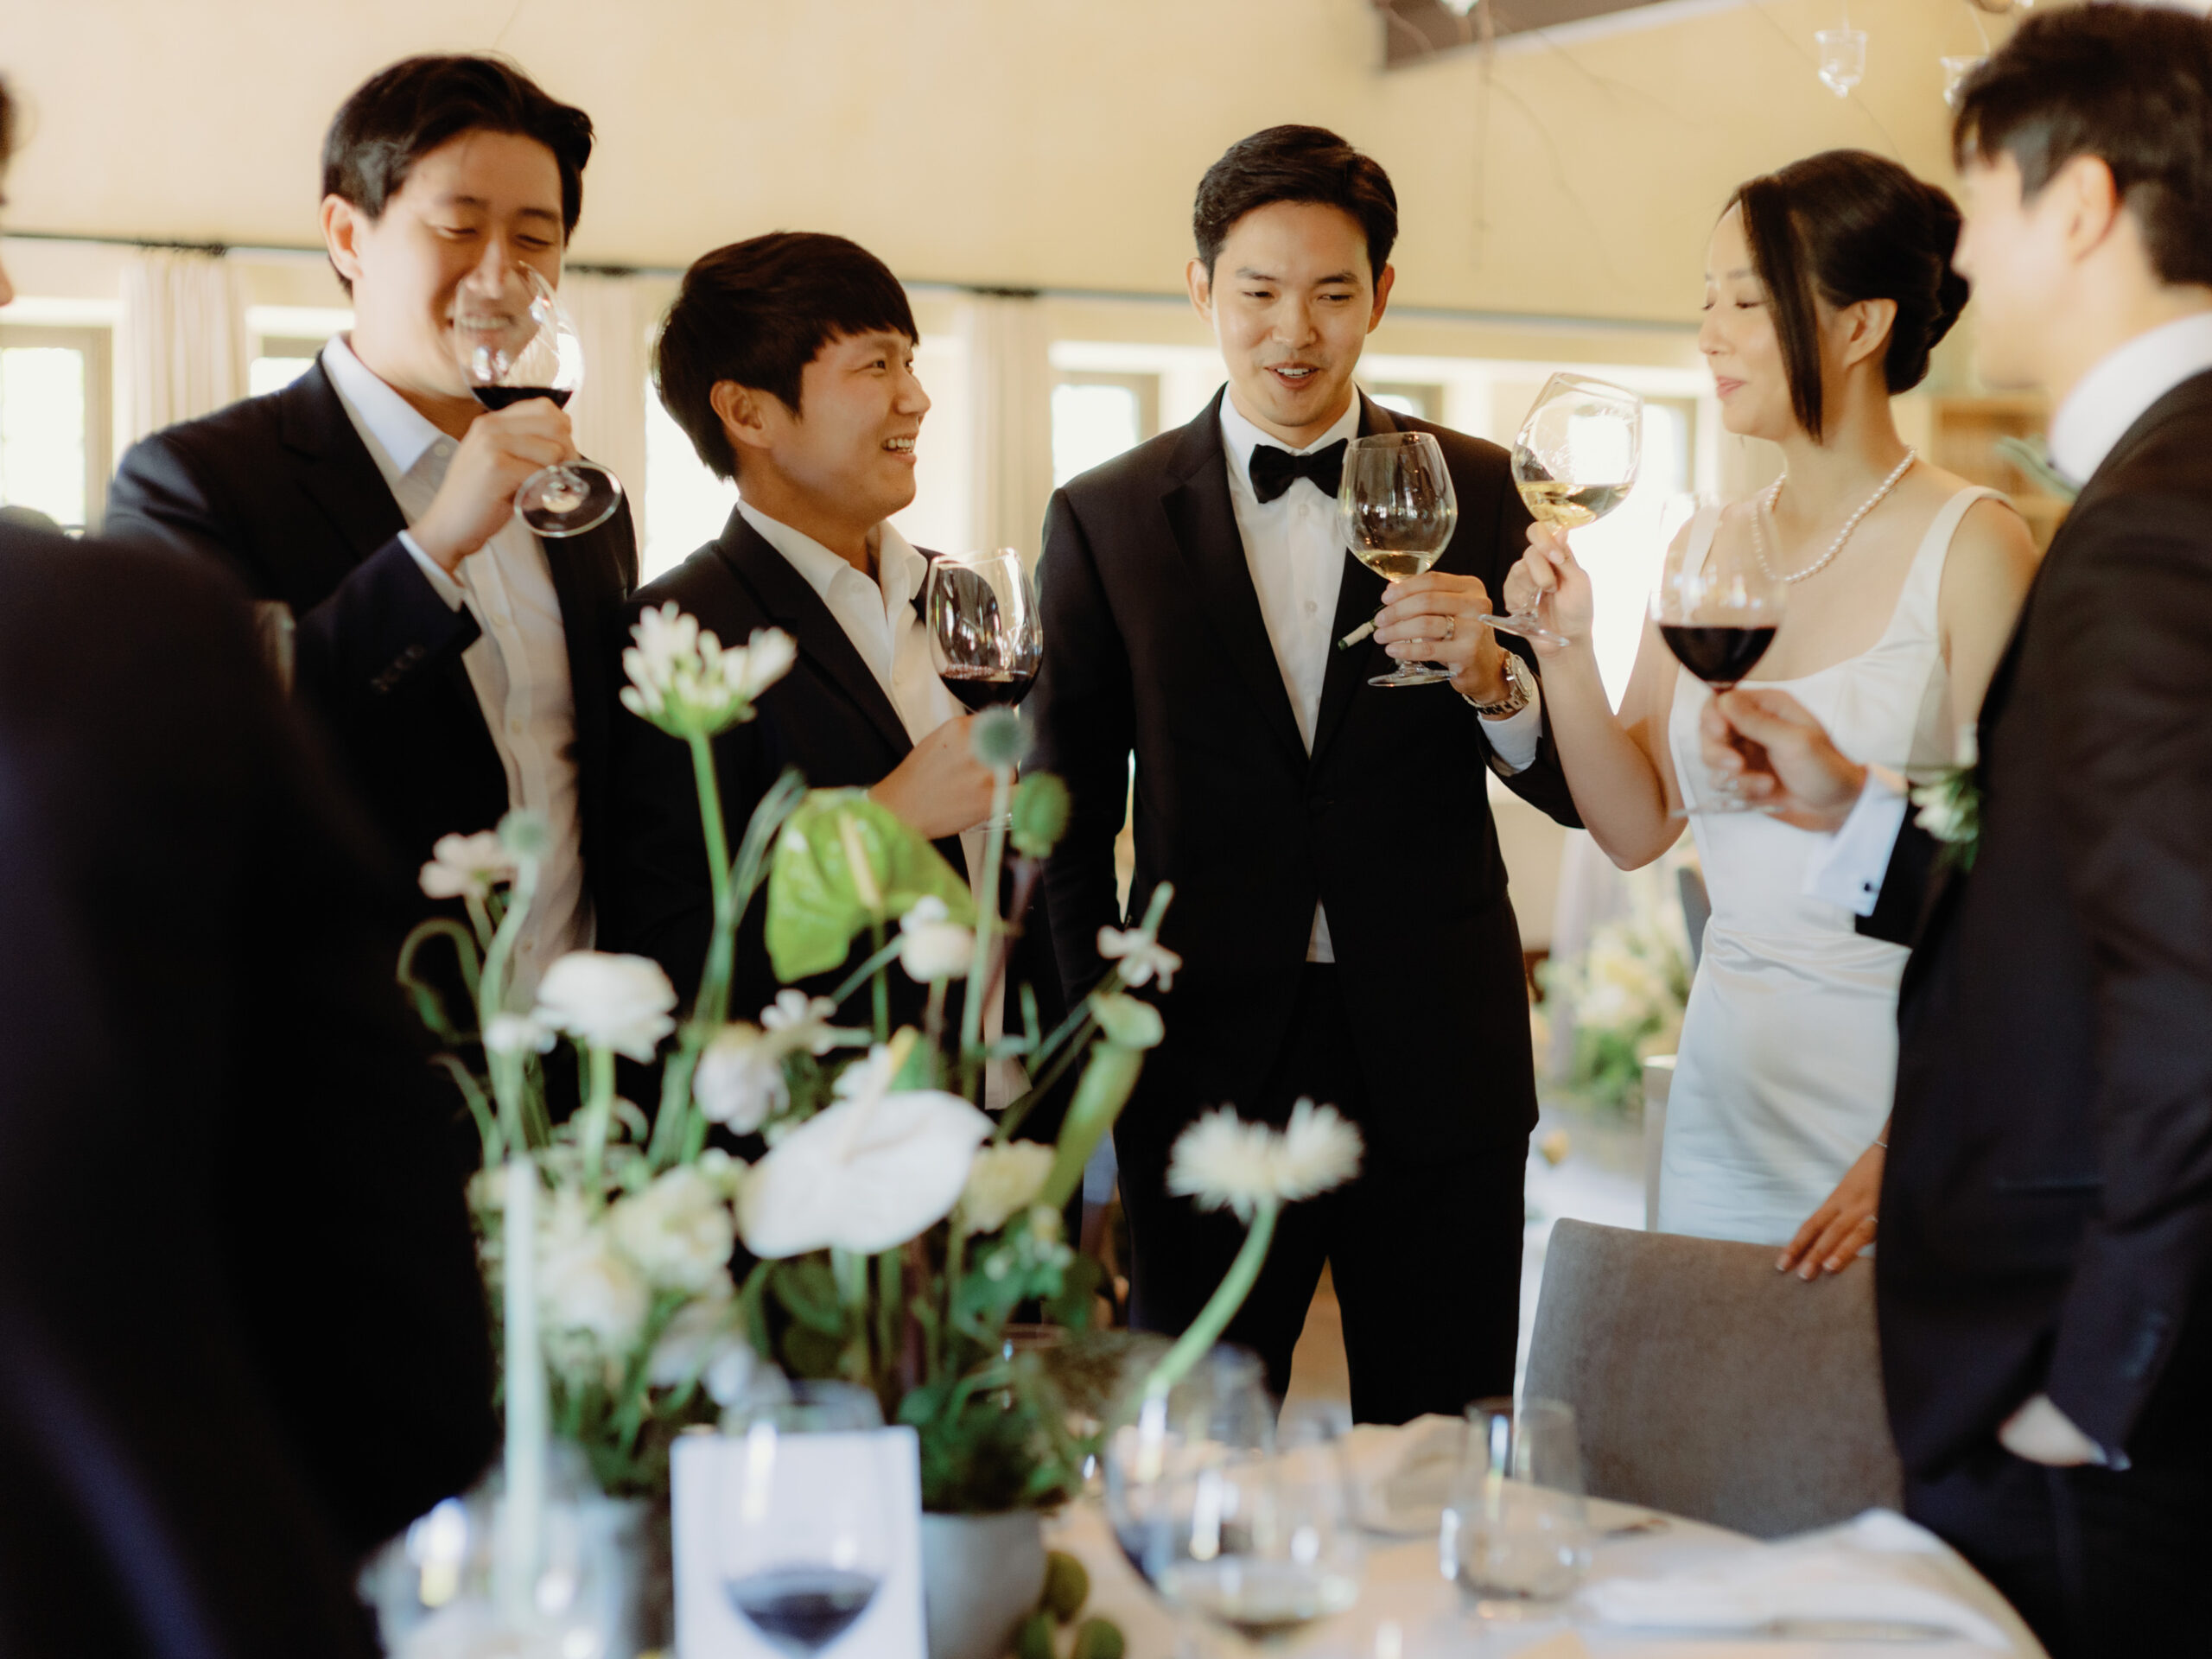 The newlyweds, together with the groomsmen are drinking champagne. Image by Jenny Fu Studio